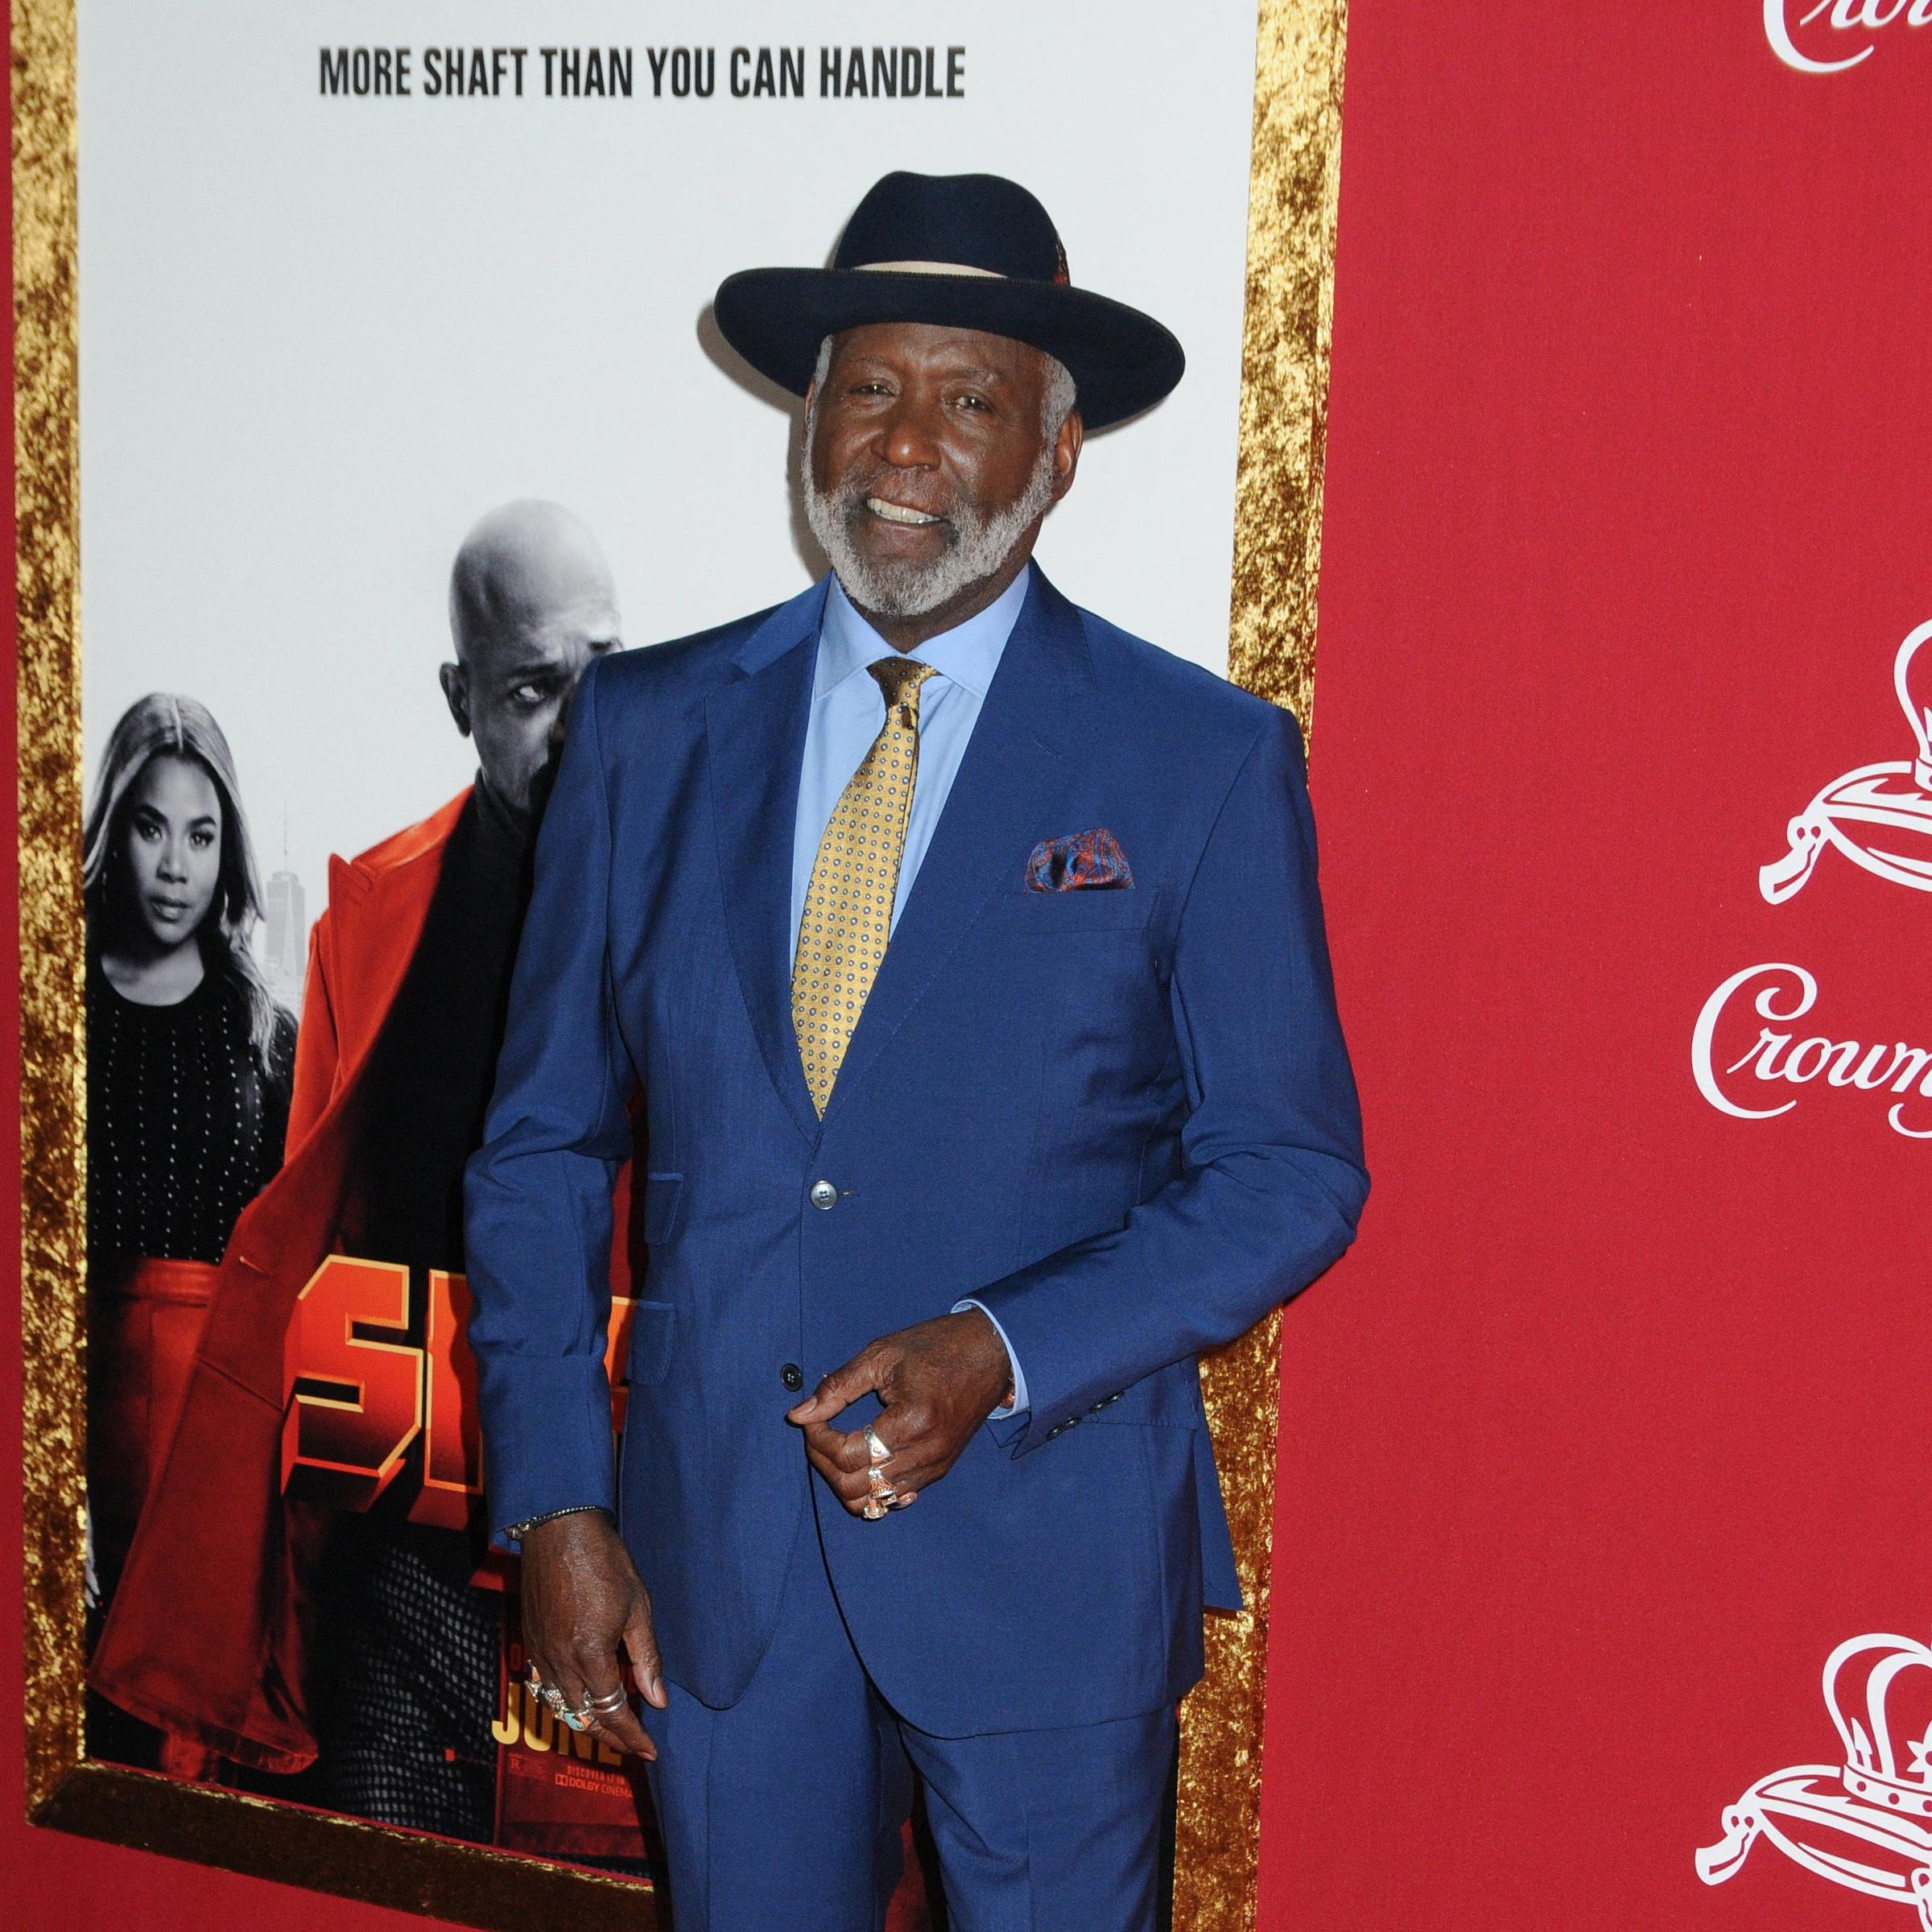 'Shaft' Actor Richard Roundtree's Cause Of Death Revealed